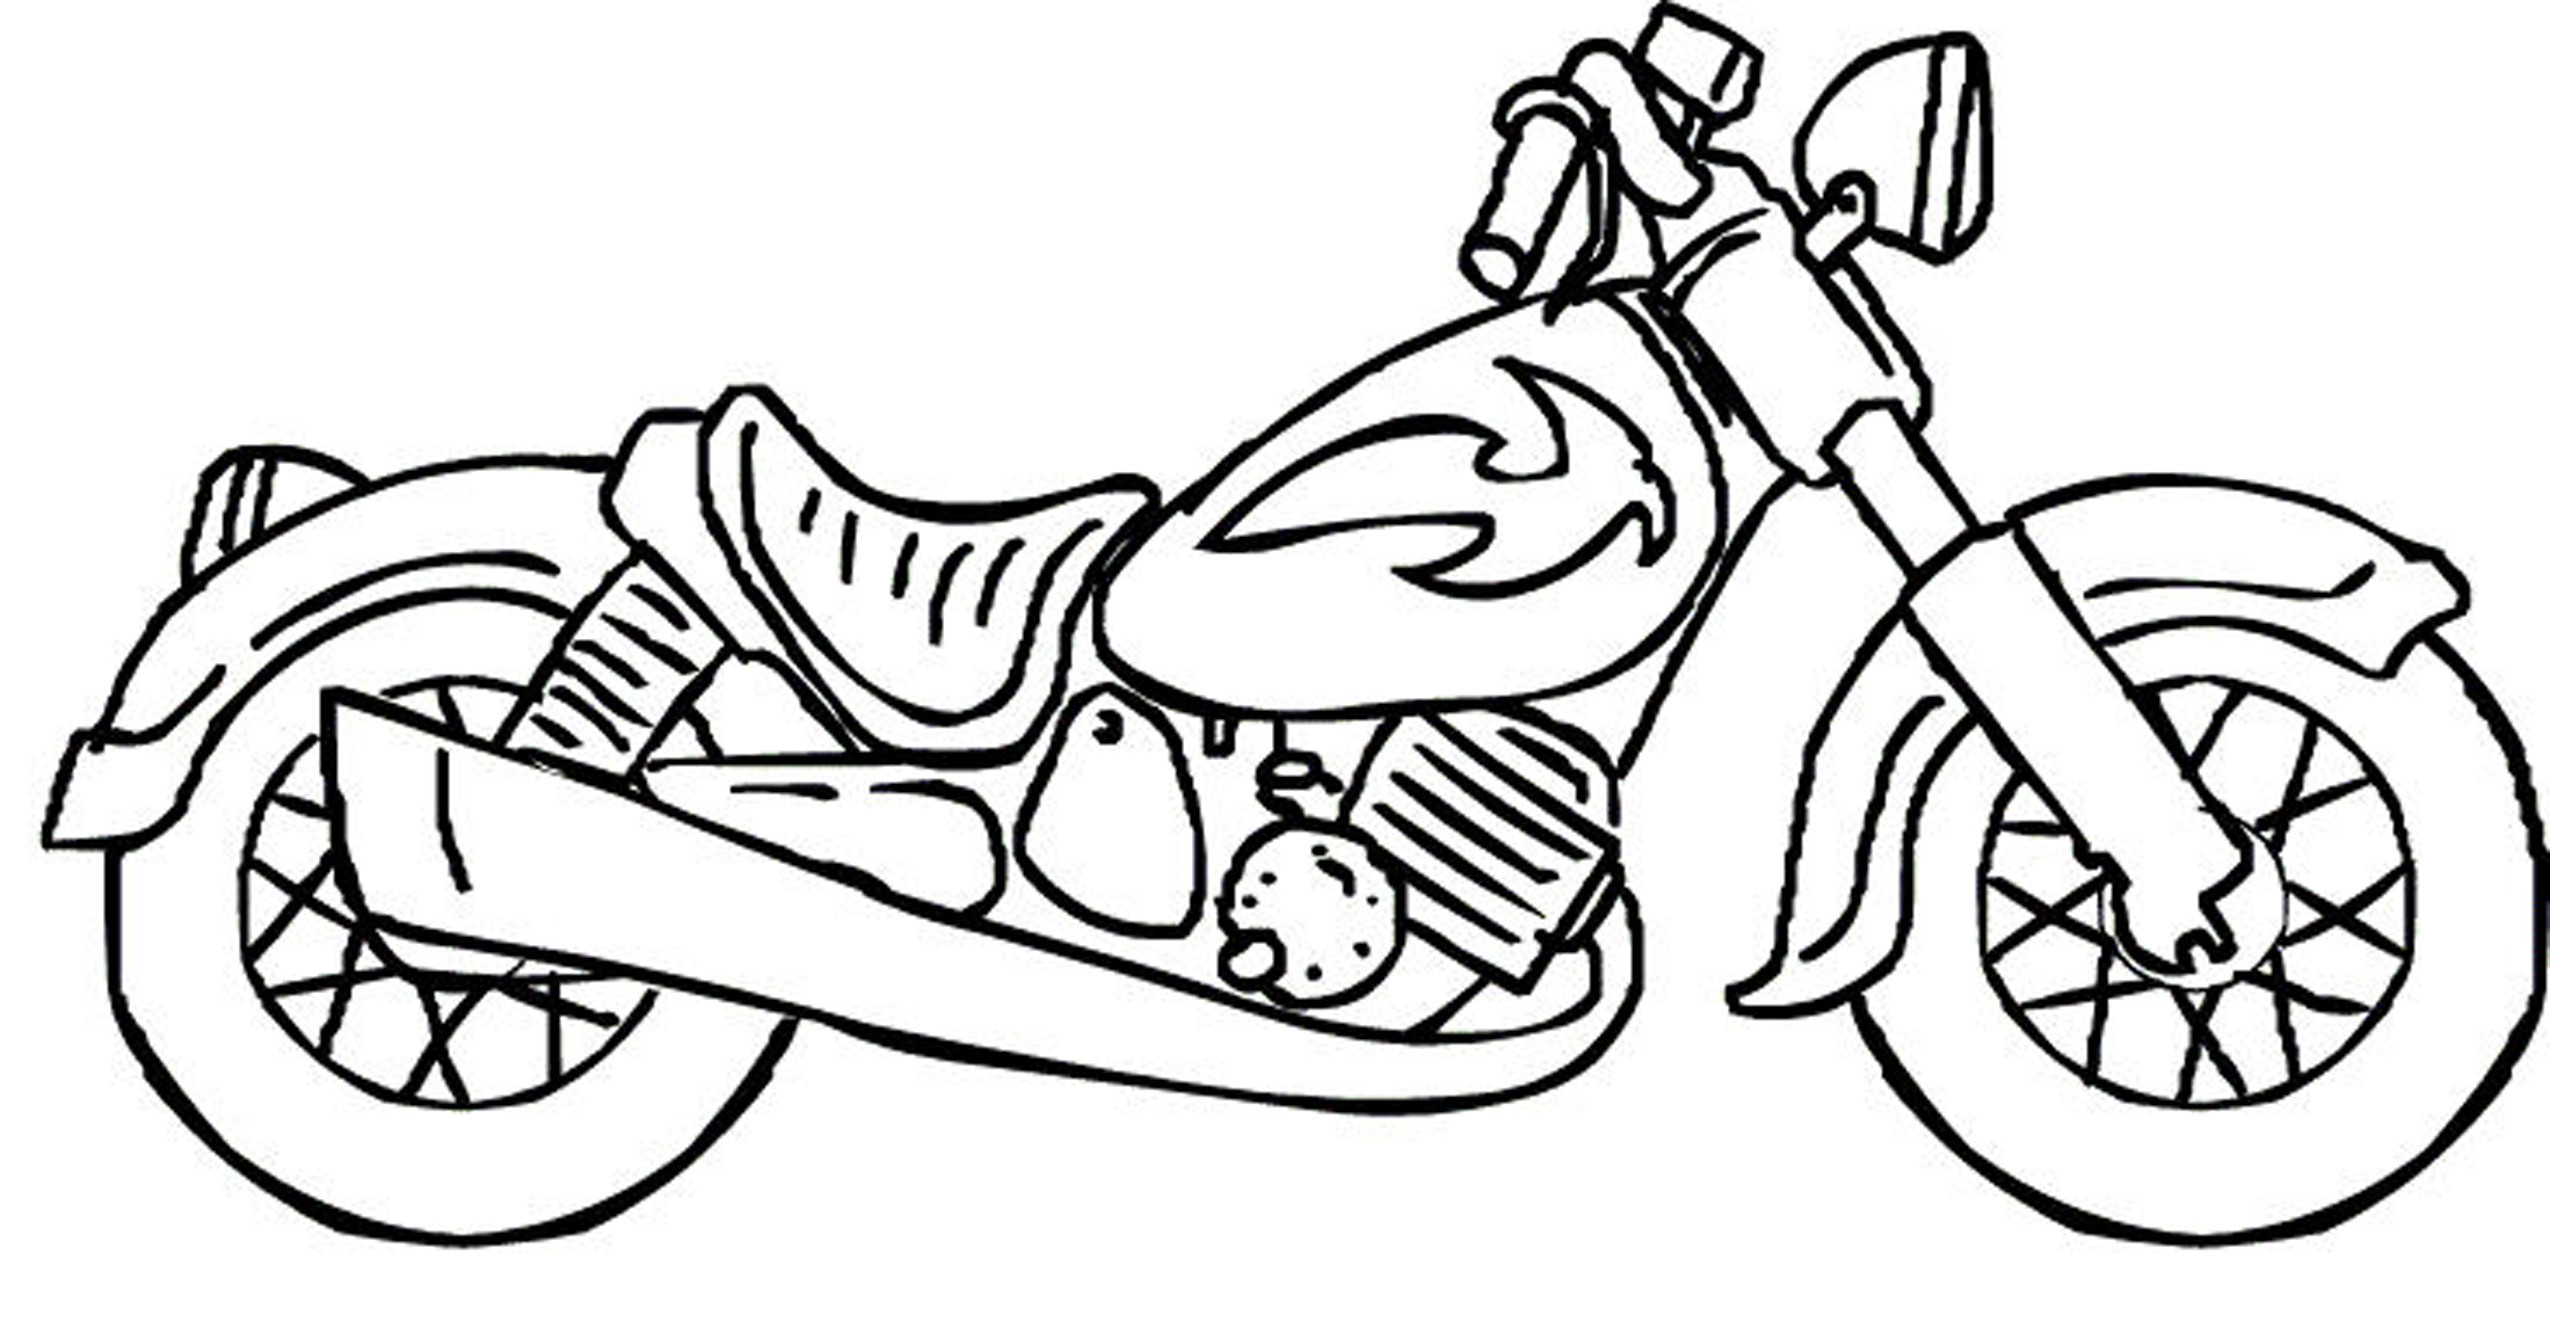 Cool Coloring Pages For Boys
 cool coloring pages for boys Gianfreda